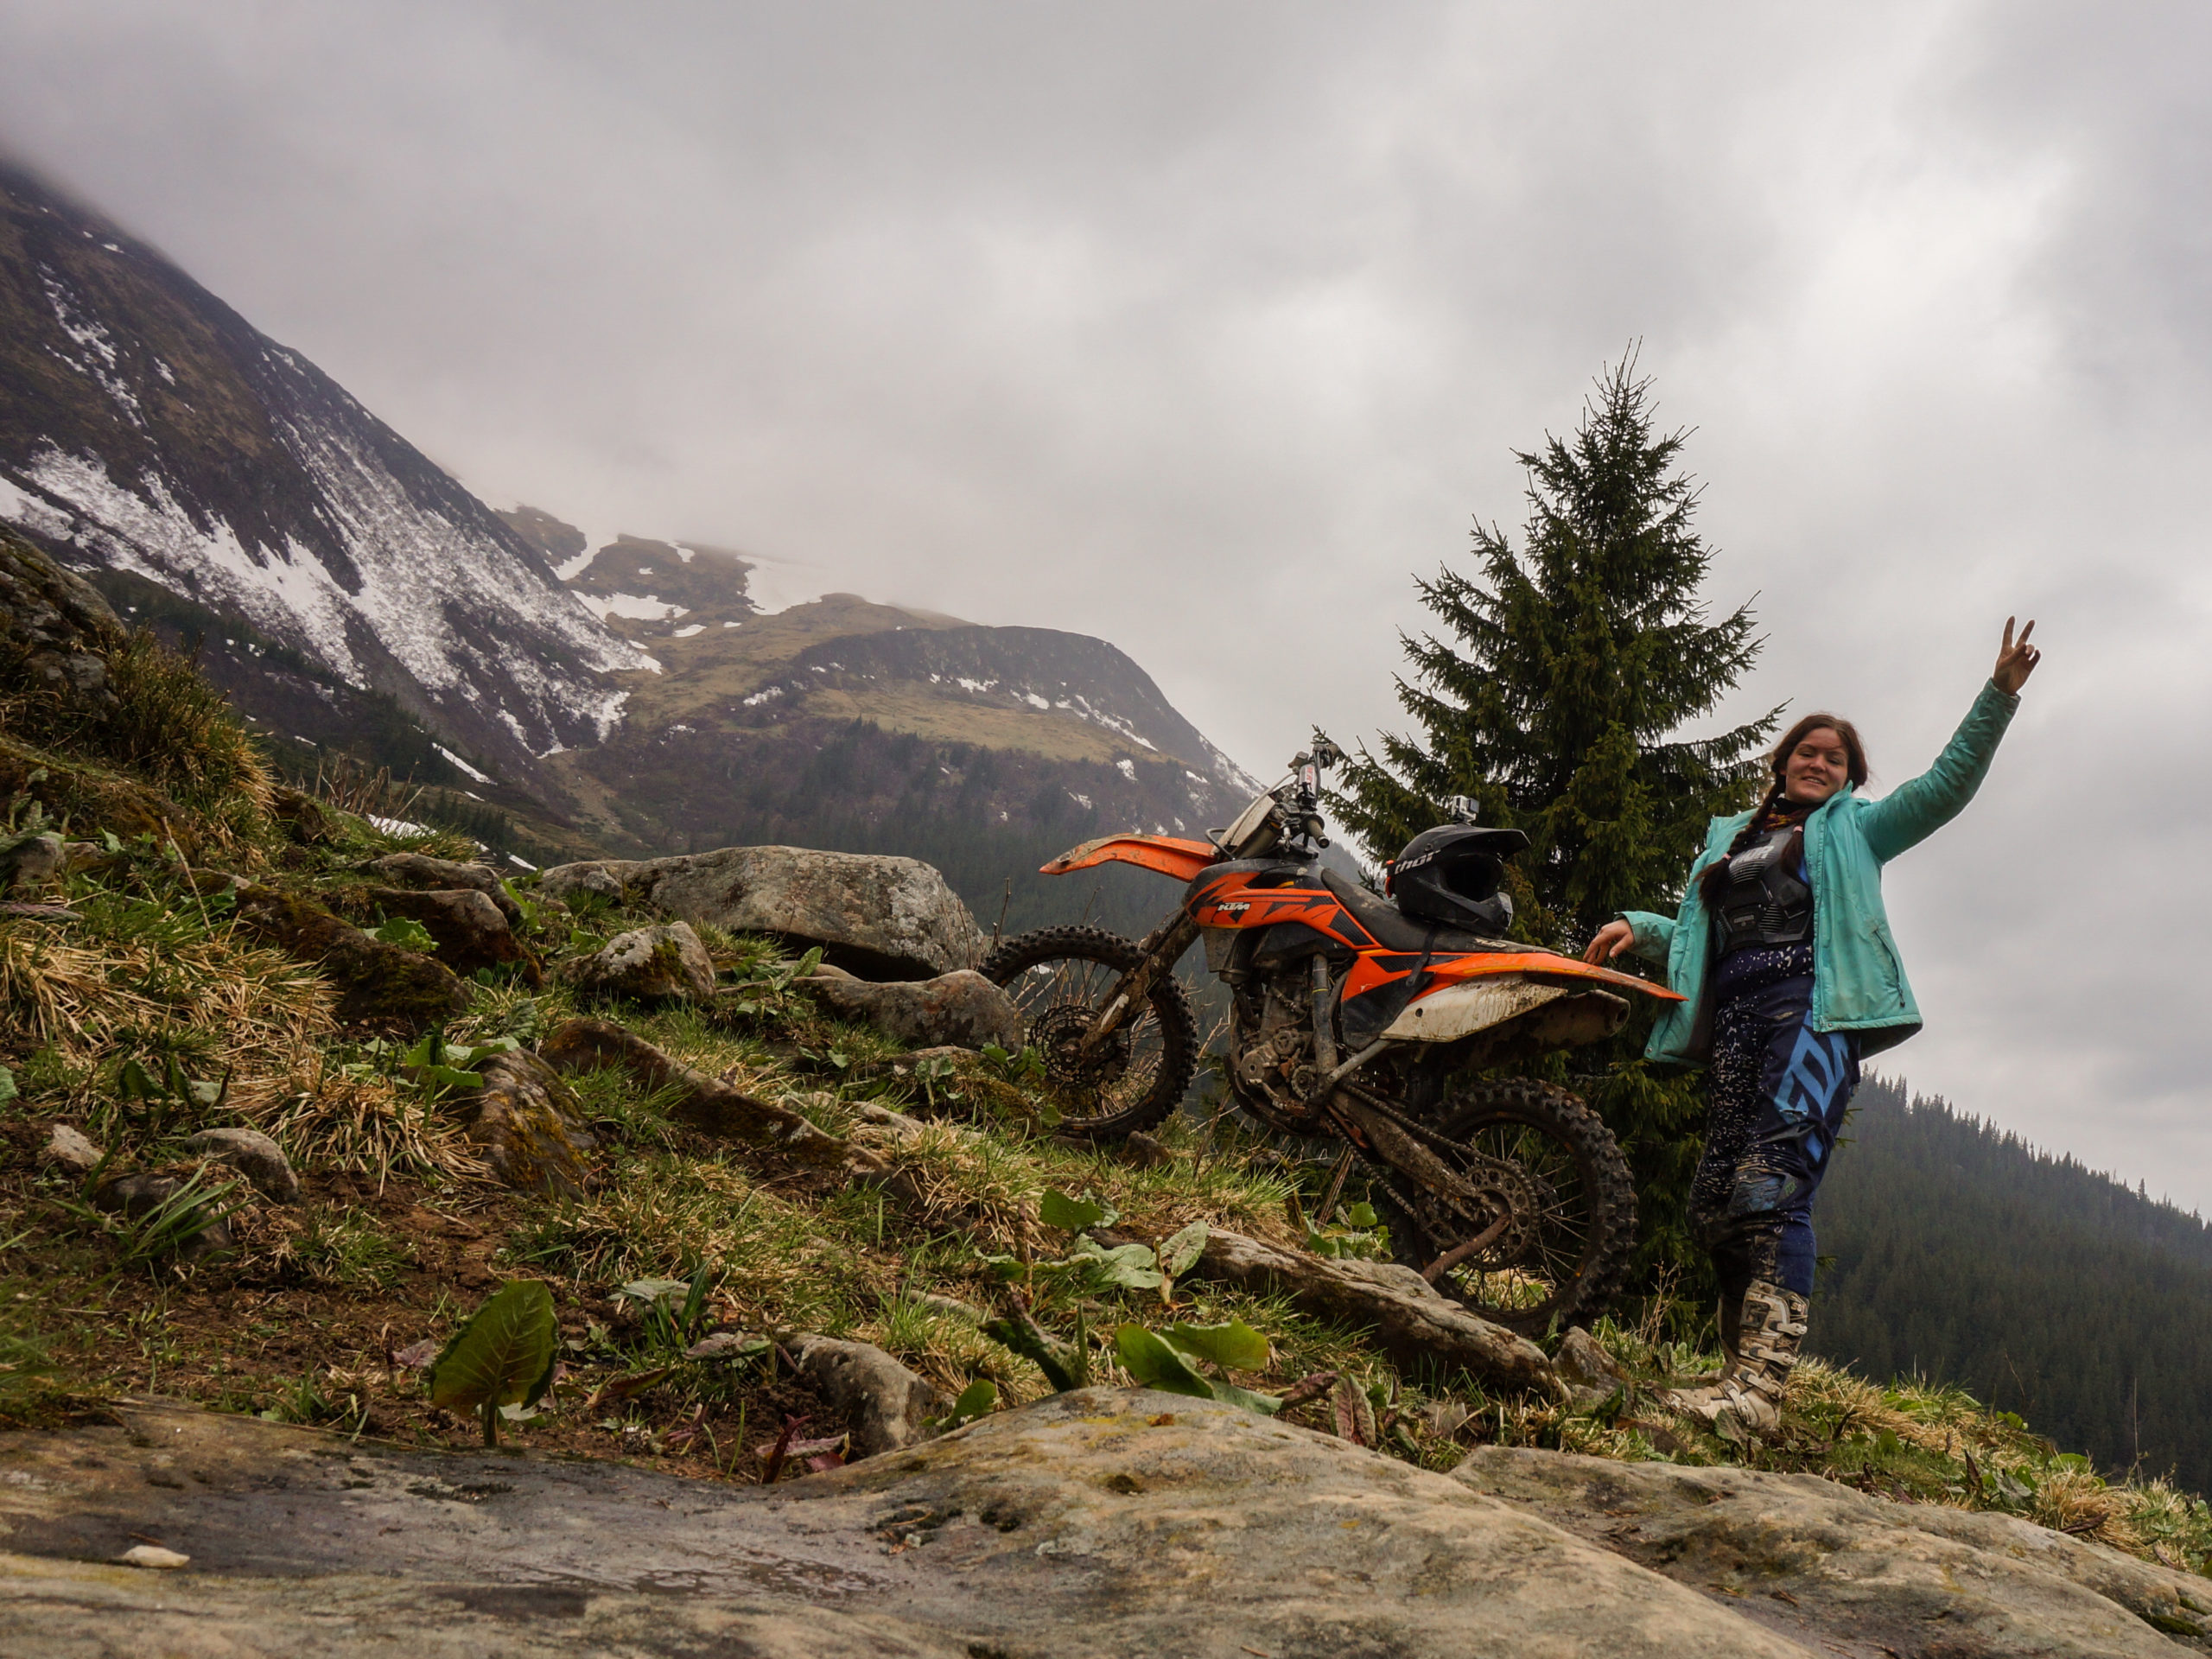 Conquering Carpathians on KTM 250. Or trying to, 2017